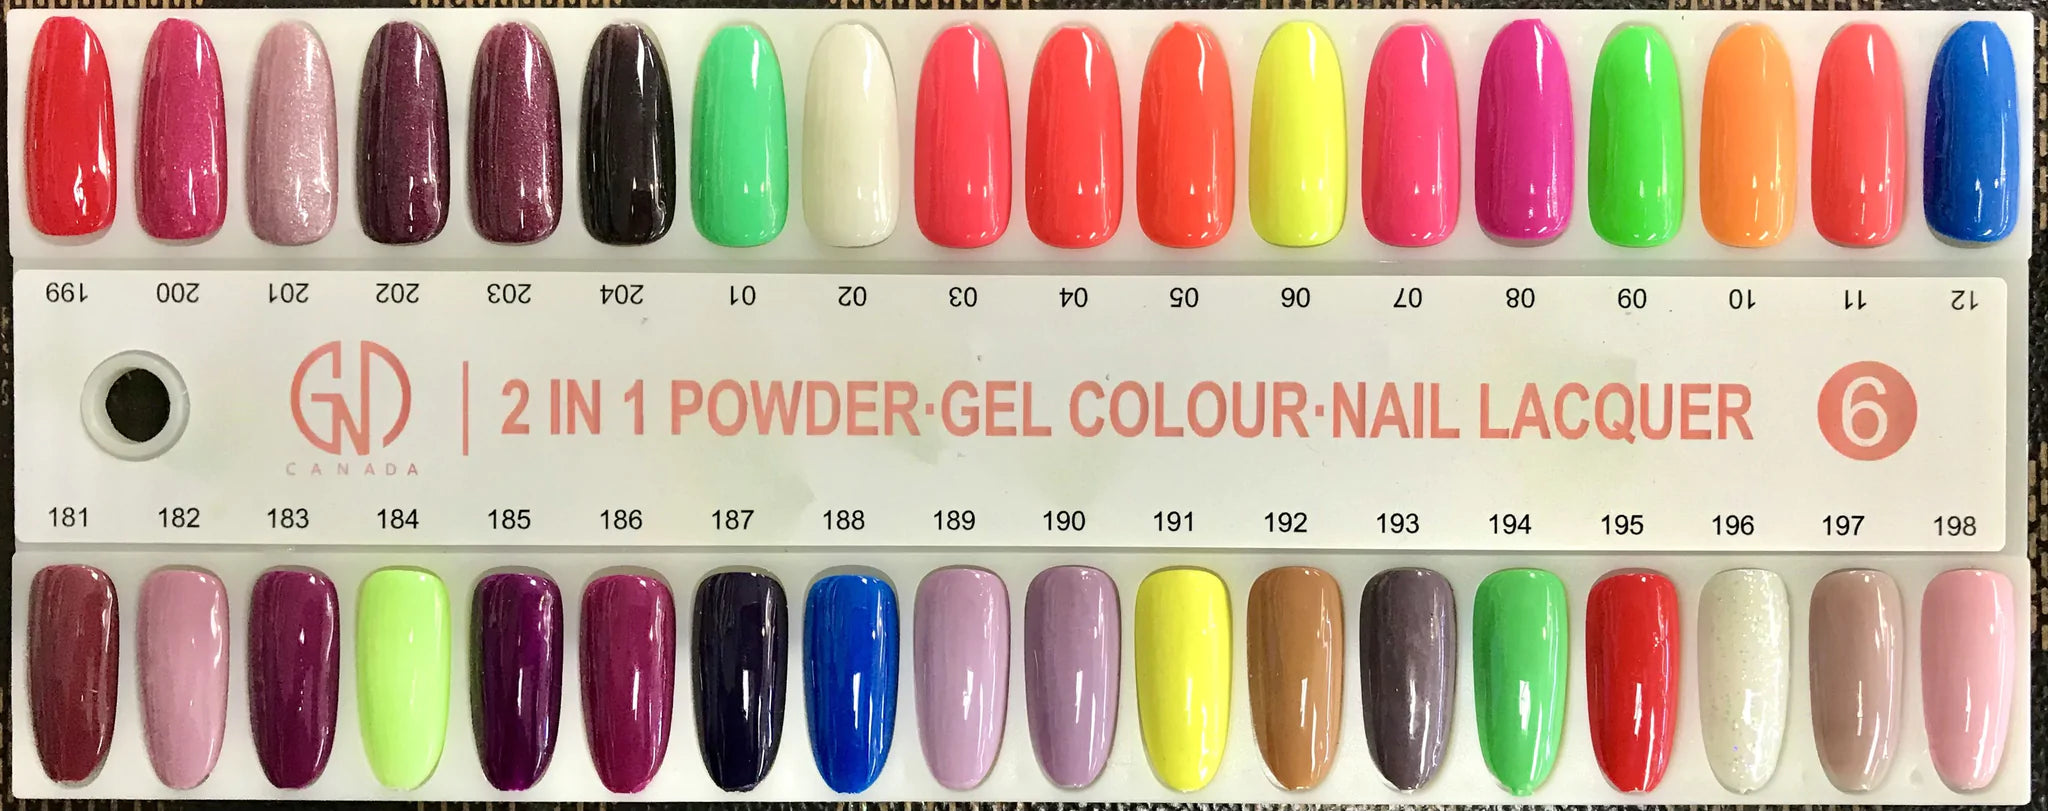 GND Duo Gel & Lacquer 200